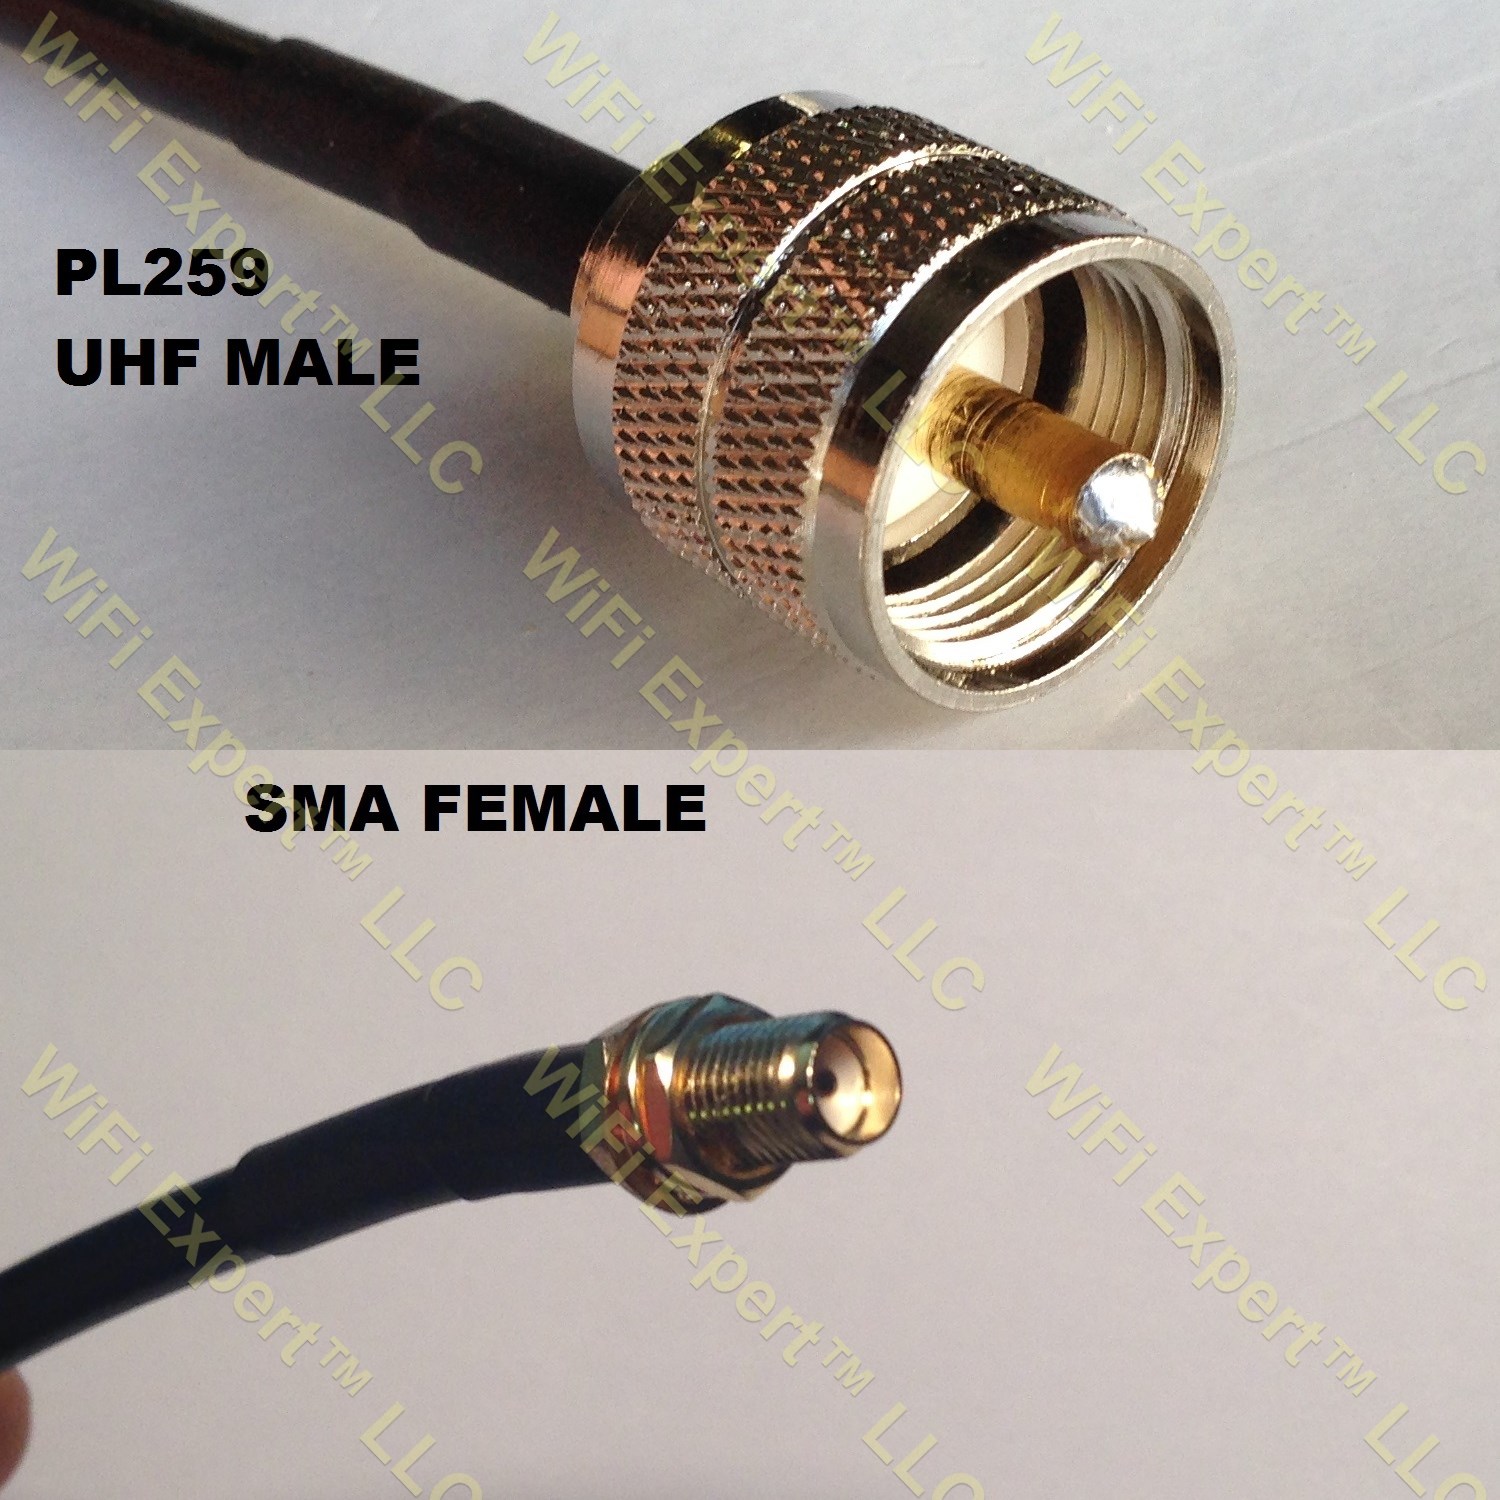 LMR240 PL259 UHF Male to SMA FEMALE Coaxial RF Pigtail Cable – RF 